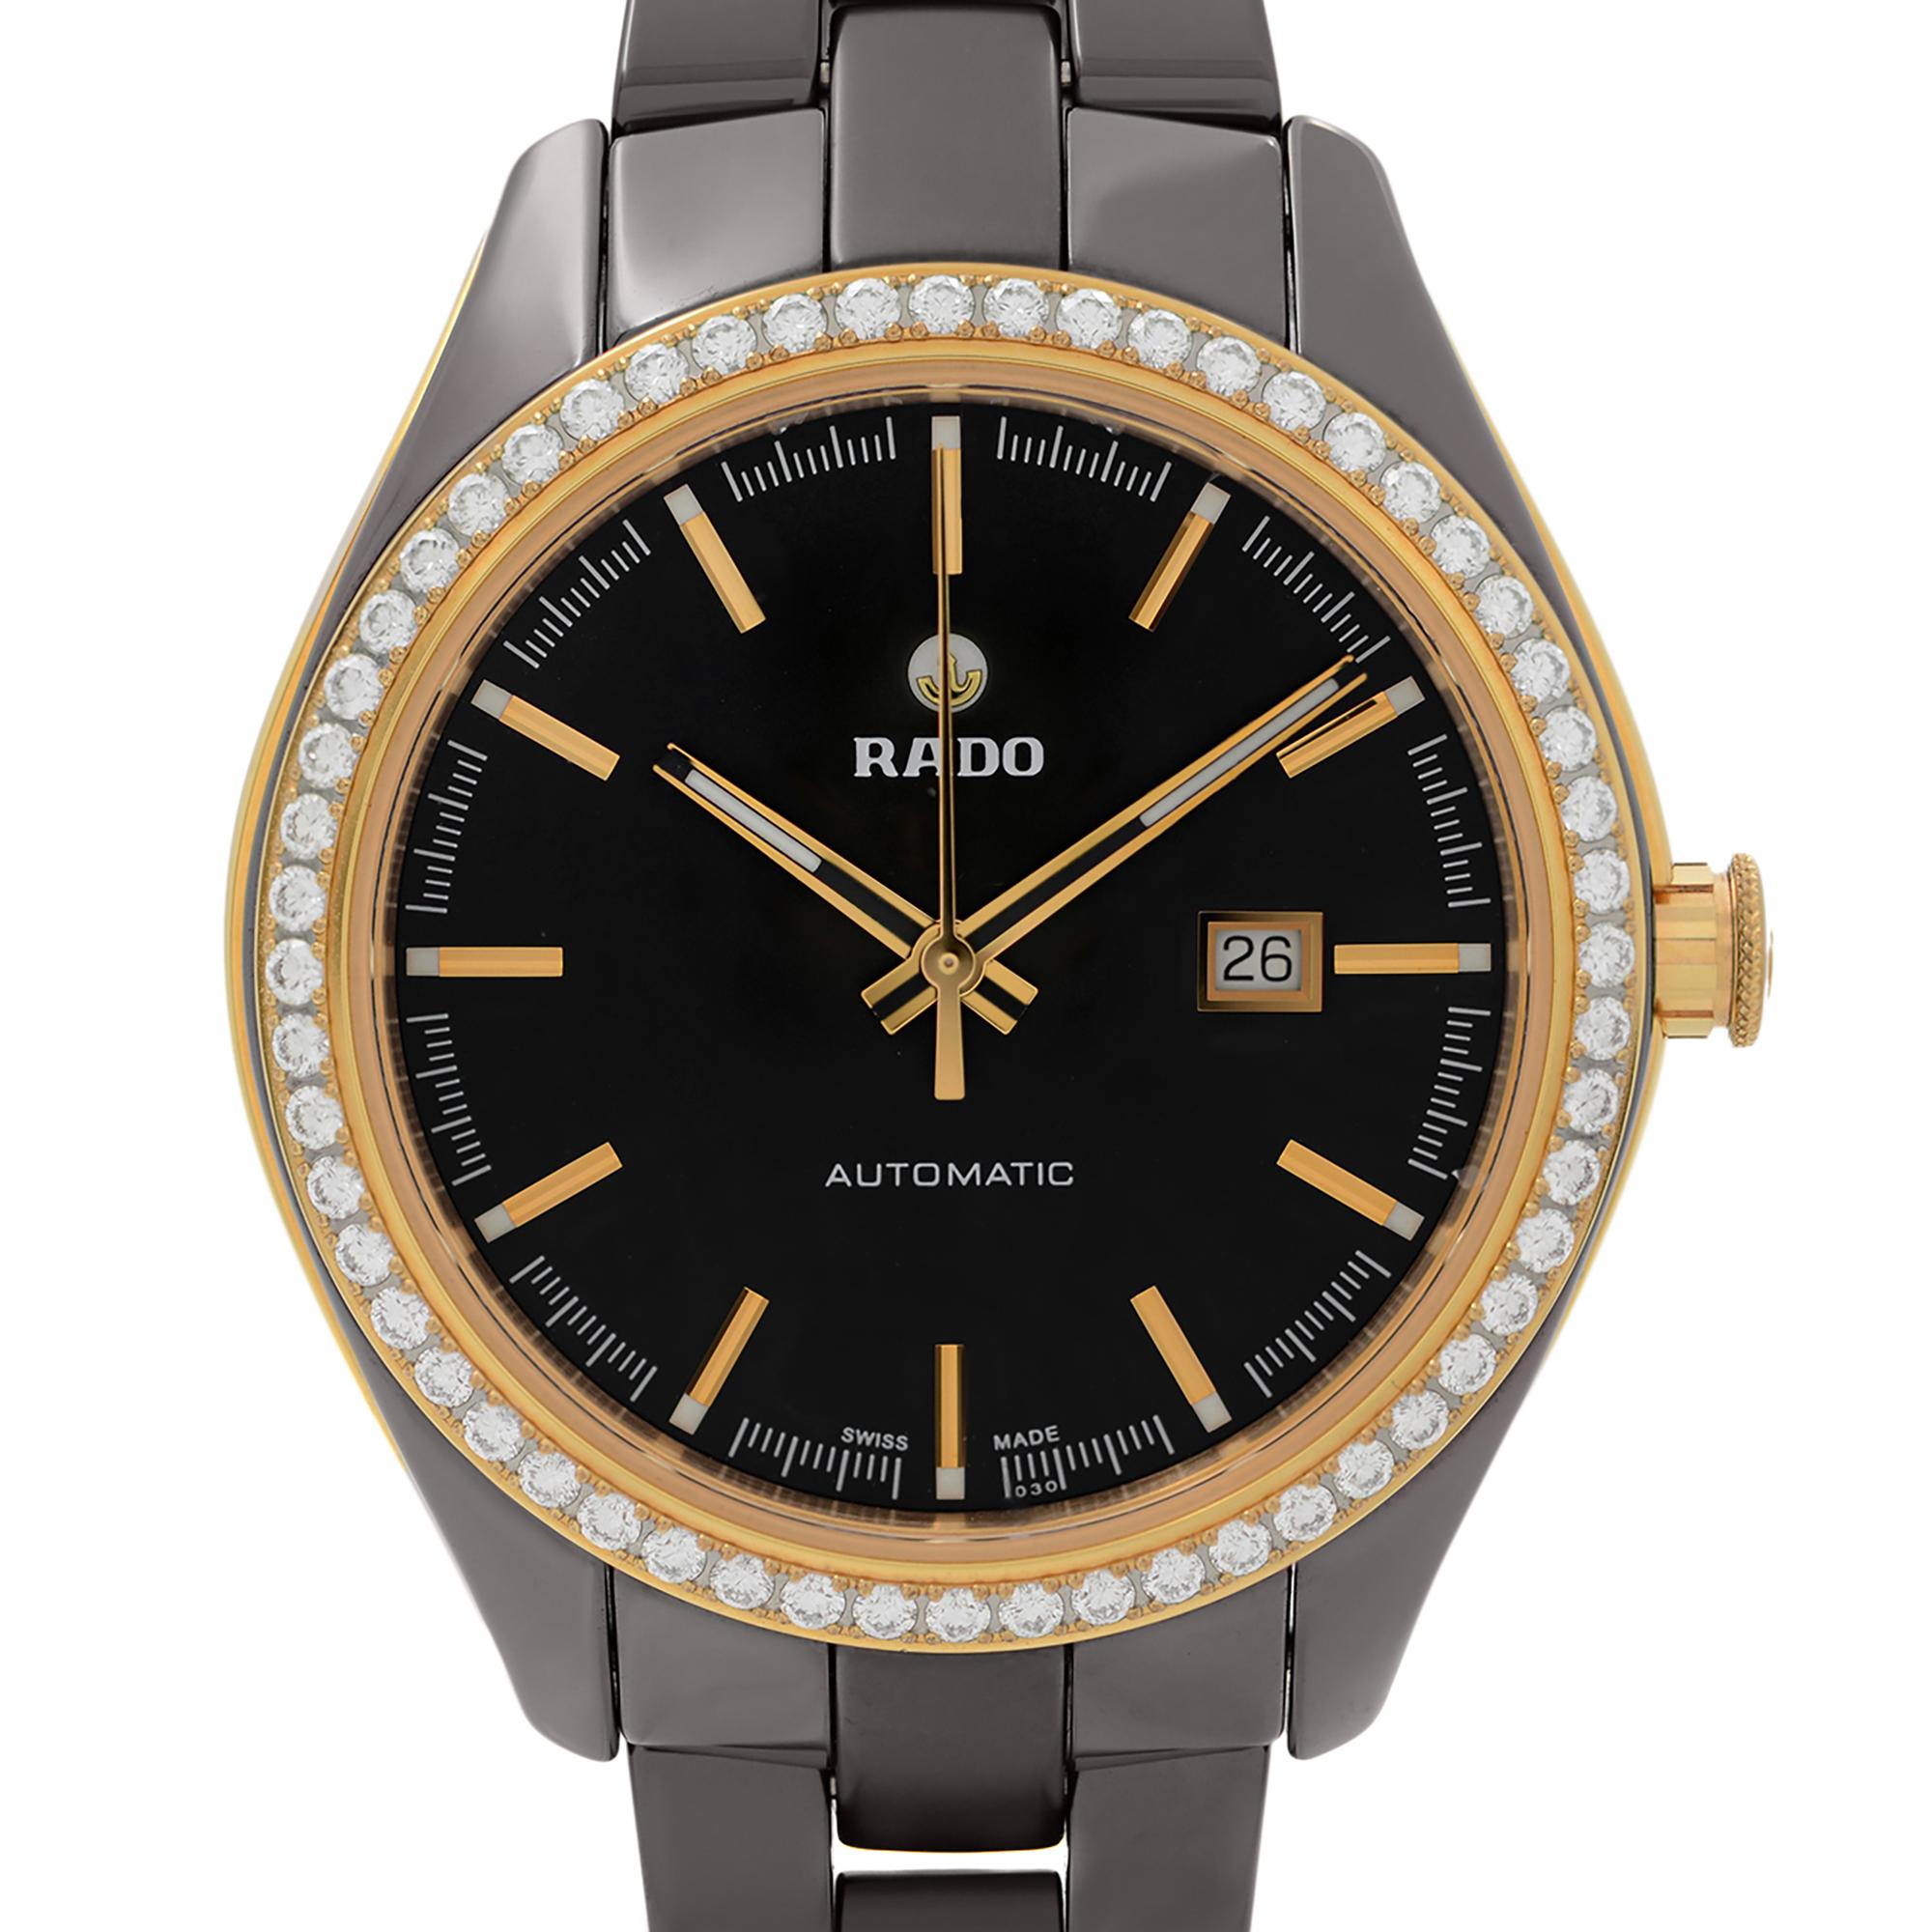 Display Model Rado HyperChrome Limited Edition 36mm Brown Ceramic Diamonds Bezel Automatic Unisex Watch R32177302. This Beautiful Timepiece is Powered by Mechanical (Automatic) Movement and Features: Brown Ceramic Case and Bracelet, Fixed Gold-Tone